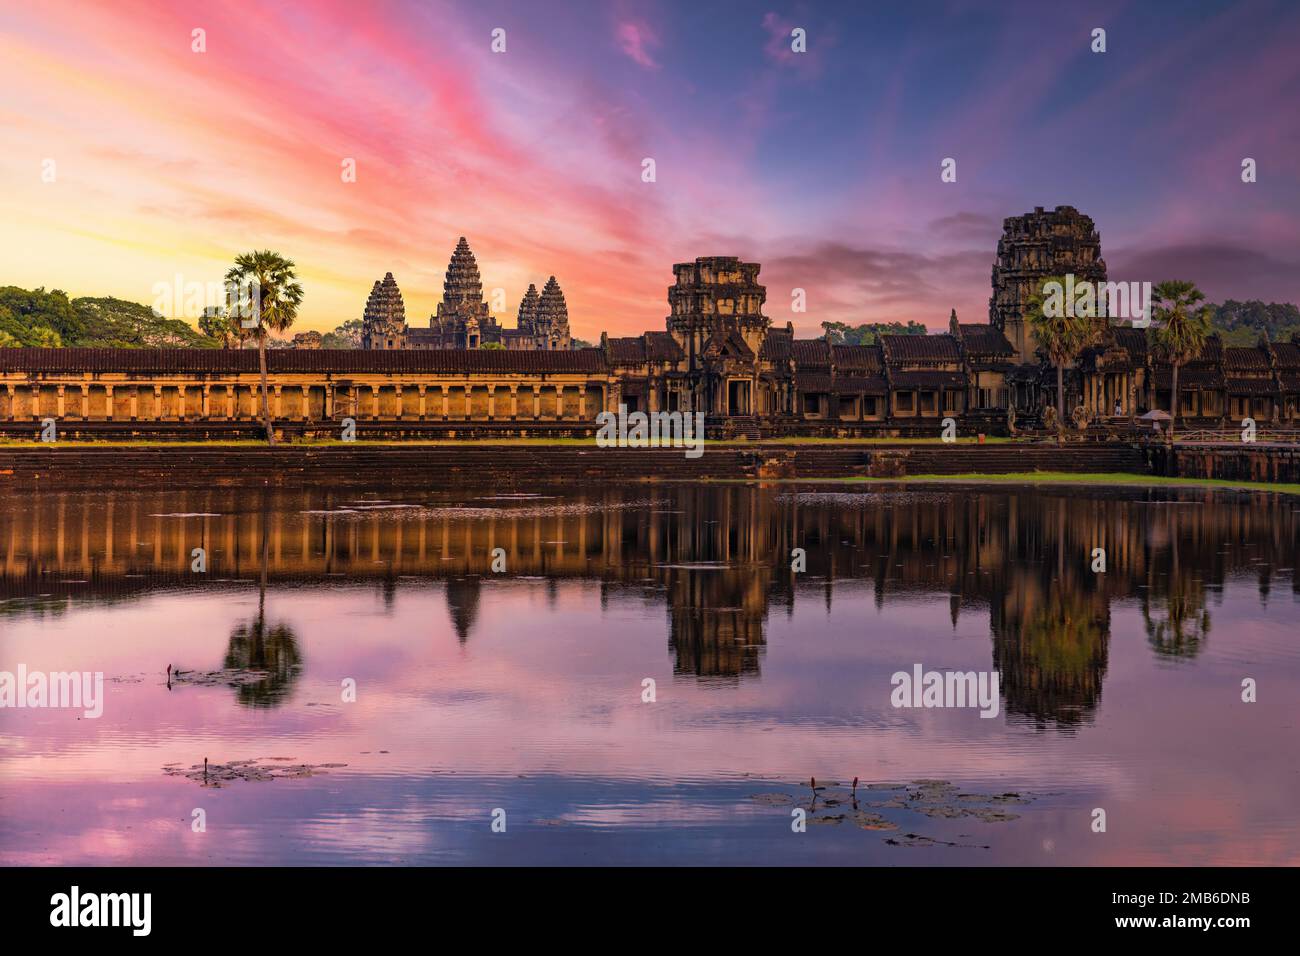 Angkor Wat temple reflecting in water of Lotus pond at sunset Stock Photo